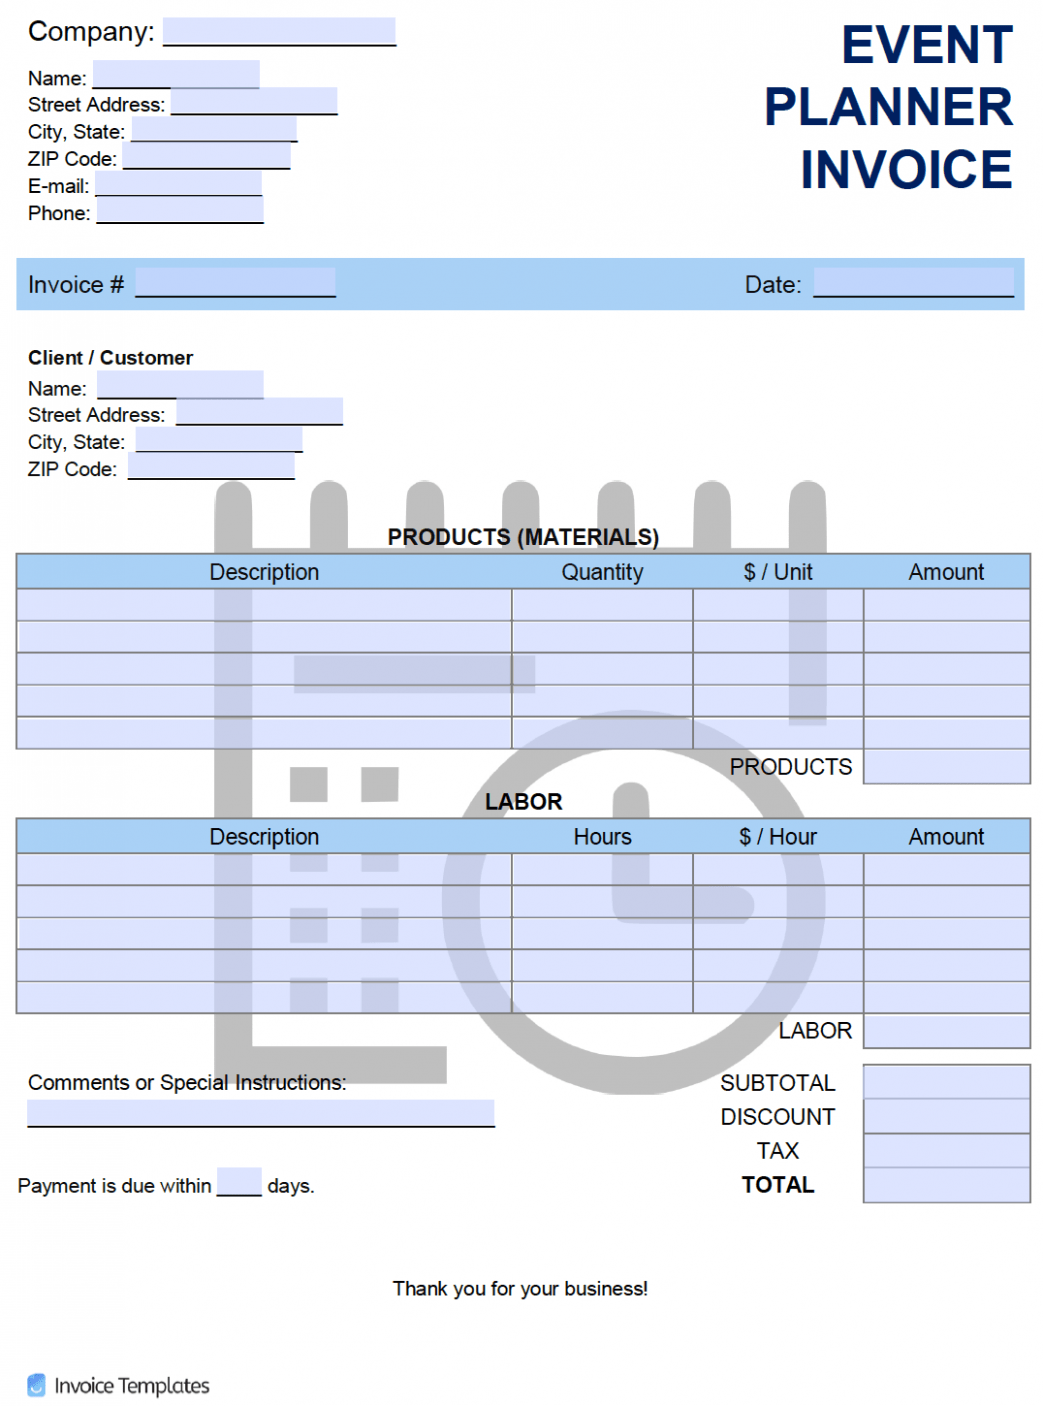 Editable Event Planning Invoice Template PPT